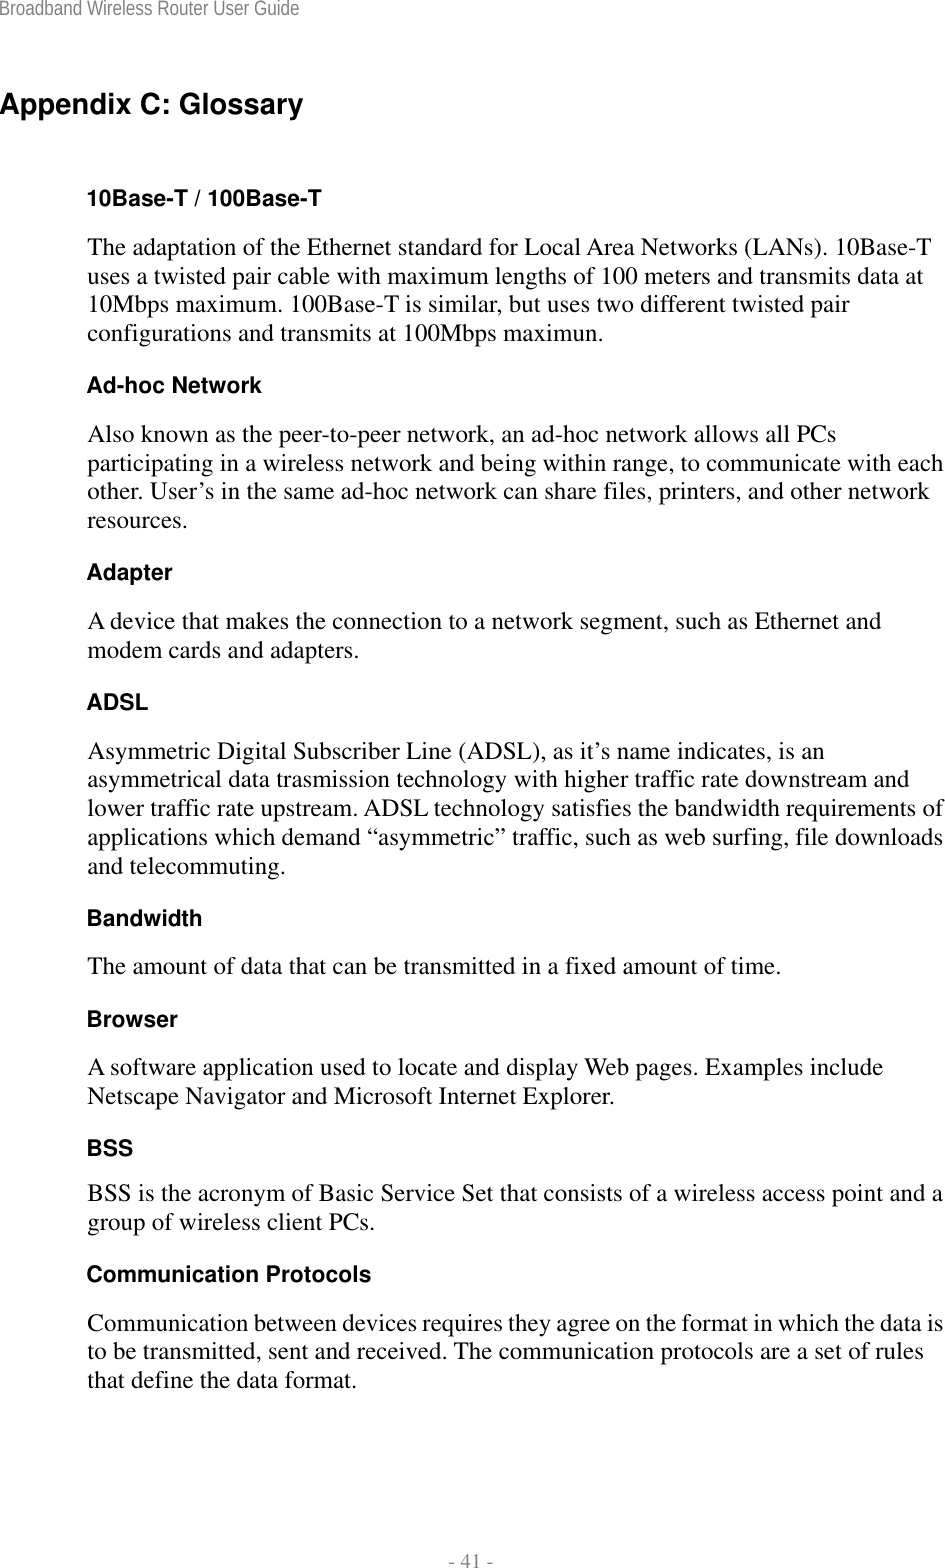 Broadband Wireless Router User Guide  - 41 - Appendix C: Glossary  10Base-T / 100Base-T The adaptation of the Ethernet standard for Local Area Networks (LANs). 10Base-T uses a twisted pair cable with maximum lengths of 100 meters and transmits data at 10Mbps maximum. 100Base-T is similar, but uses two different twisted pair configurations and transmits at 100Mbps maximun. Ad-hoc Network Also known as the peer-to-peer network, an ad-hoc network allows all PCs participating in a wireless network and being within range, to communicate with each other. User’s in the same ad-hoc network can share files, printers, and other network resources. Adapter A device that makes the connection to a network segment, such as Ethernet and modem cards and adapters. ADSL Asymmetric Digital Subscriber Line (ADSL), as it’s name indicates, is an asymmetrical data trasmission technology with higher traffic rate downstream and lower traffic rate upstream. ADSL technology satisfies the bandwidth requirements of applications which demand “asymmetric” traffic, such as web surfing, file downloads and telecommuting. Bandwidth The amount of data that can be transmitted in a fixed amount of time. Browser A software application used to locate and display Web pages. Examples include Netscape Navigator and Microsoft Internet Explorer. BSS BSS is the acronym of Basic Service Set that consists of a wireless access point and a group of wireless client PCs.  Communication Protocols Communication between devices requires they agree on the format in which the data is to be transmitted, sent and received. The communication protocols are a set of rules that define the data format. 